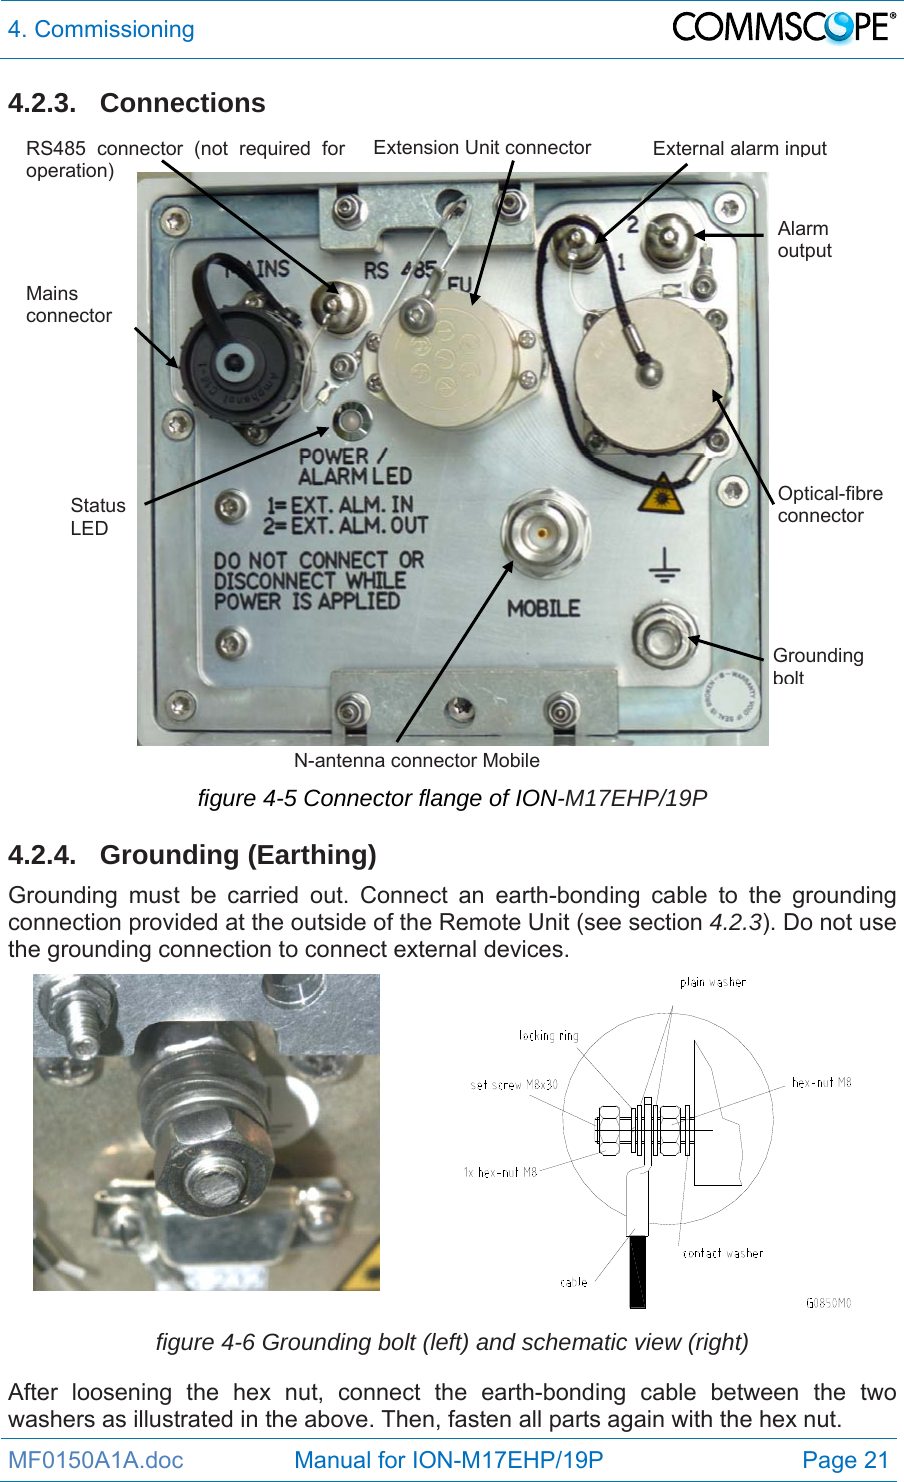 4. Commissioning  MF0150A1A.doc                 Manual for ION-M17EHP/19P  Page 21 4.2.3. Connections     figure 4-5 Connector flange of ION-M17EHP/19P  4.2.4. Grounding (Earthing)  Grounding must be carried out. Connect an earth-bonding cable to the grounding connection provided at the outside of the Remote Unit (see section 4.2.3). Do not use the grounding connection to connect external devices.   figure 4-6 Grounding bolt (left) and schematic view (right) After loosening the hex nut, connect the earth-bonding cable between the two washers as illustrated in the above. Then, fasten all parts again with the hex nut. Grounding boltN-antenna connector Mobile Mains connector Status LED External alarm input Alarm  output Optical-fibre connector RS485 connector (not required for operation) Extension Unit connector 